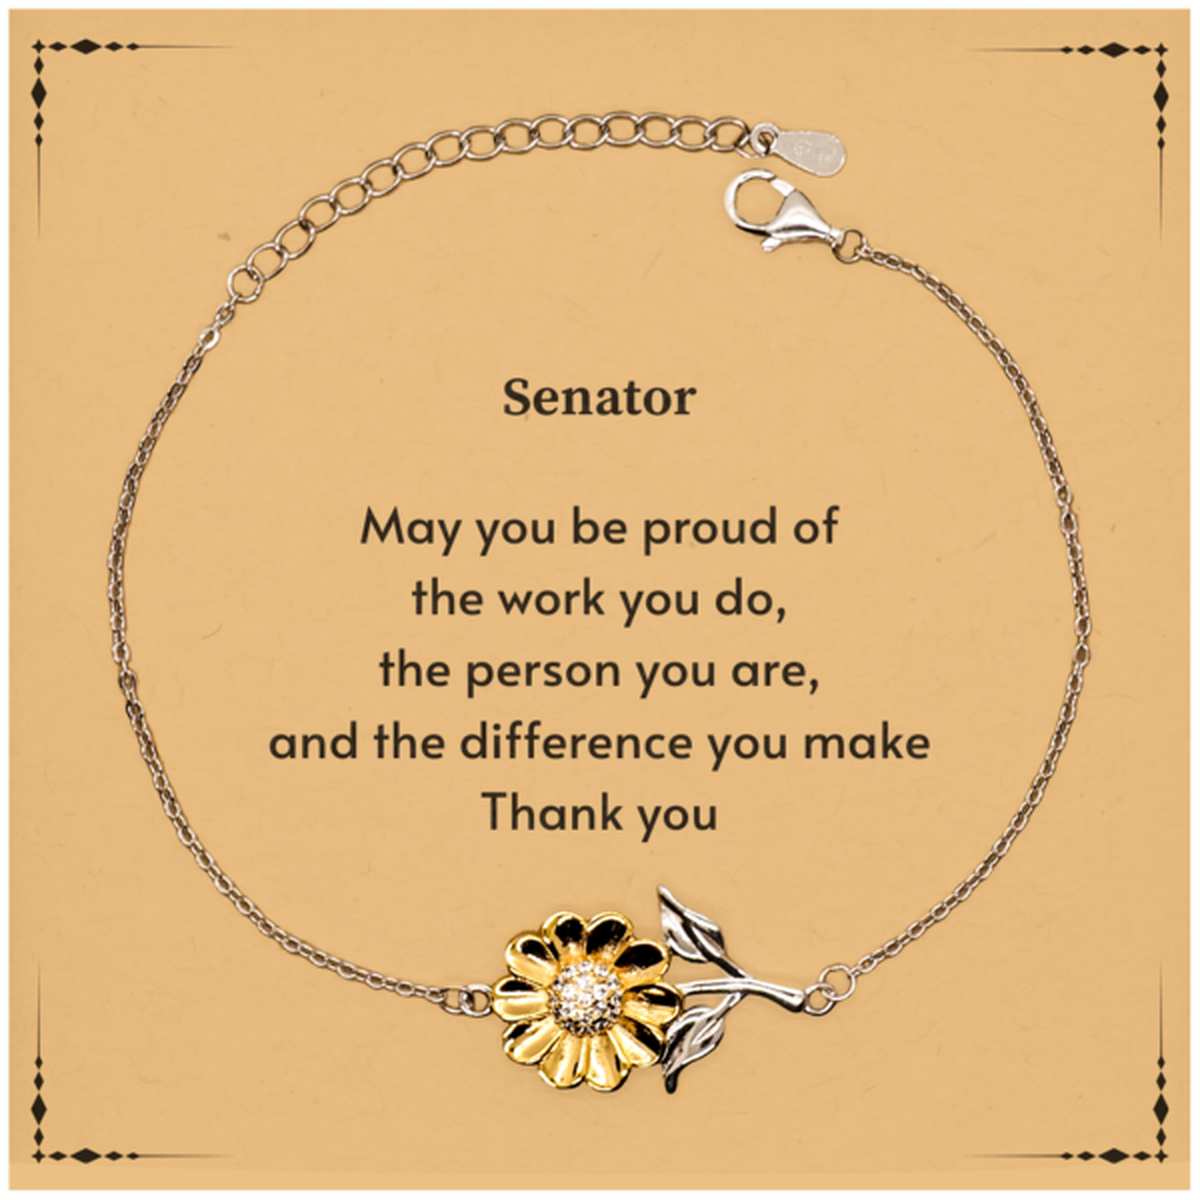 Heartwarming Sunflower Bracelet Retirement Coworkers Gifts for Senator, Senator May You be proud of the work you do, the person you are Gifts for Boss Men Women Friends